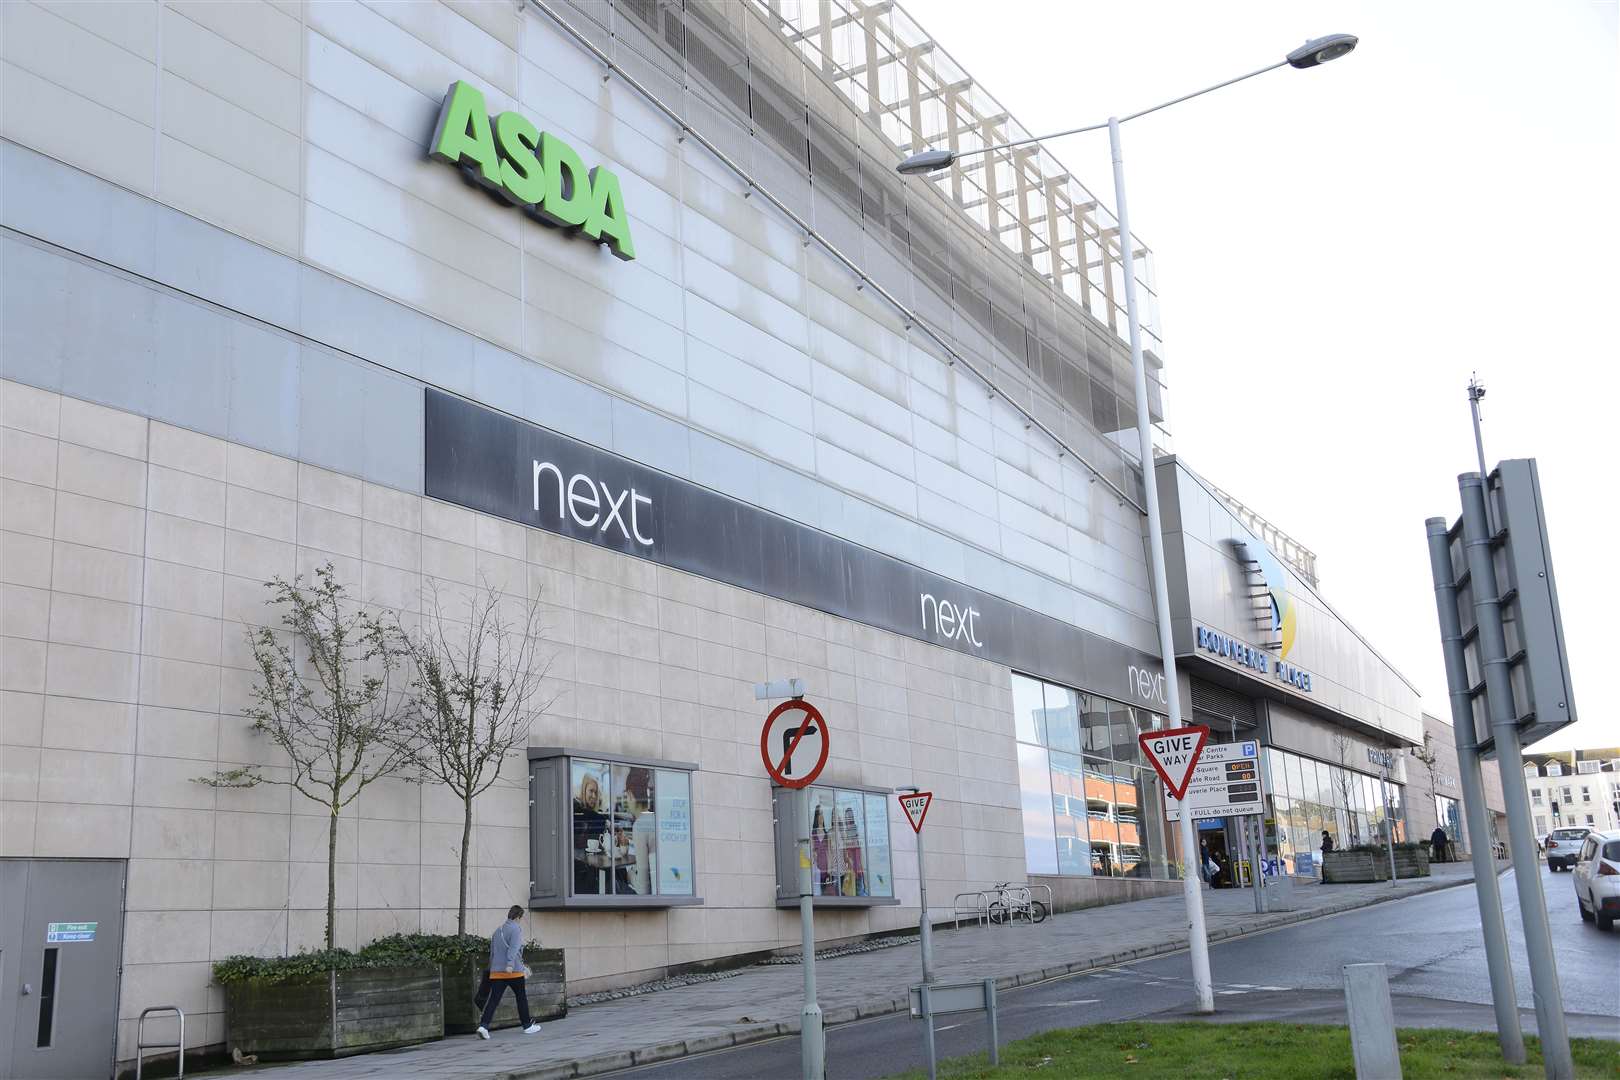 The attacks took place at Asda in Folkestone's Bouverie Place